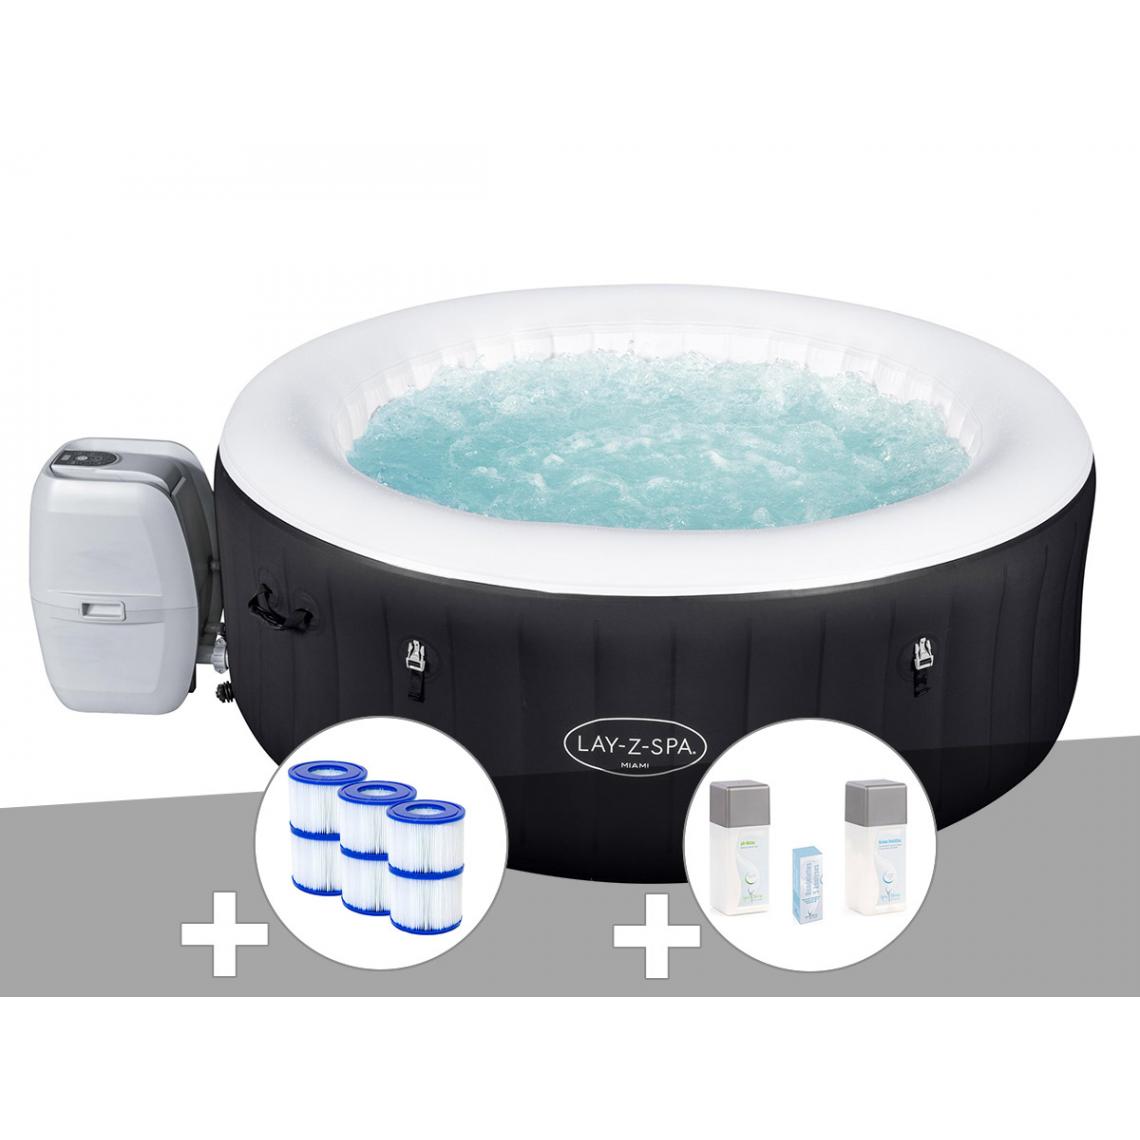 Bestway - Kit spa gonflable Bestway Lay-Z-Spa Miami rond Airjet 4 places + 6 filtres + Kit traitement brome - Spa gonflable